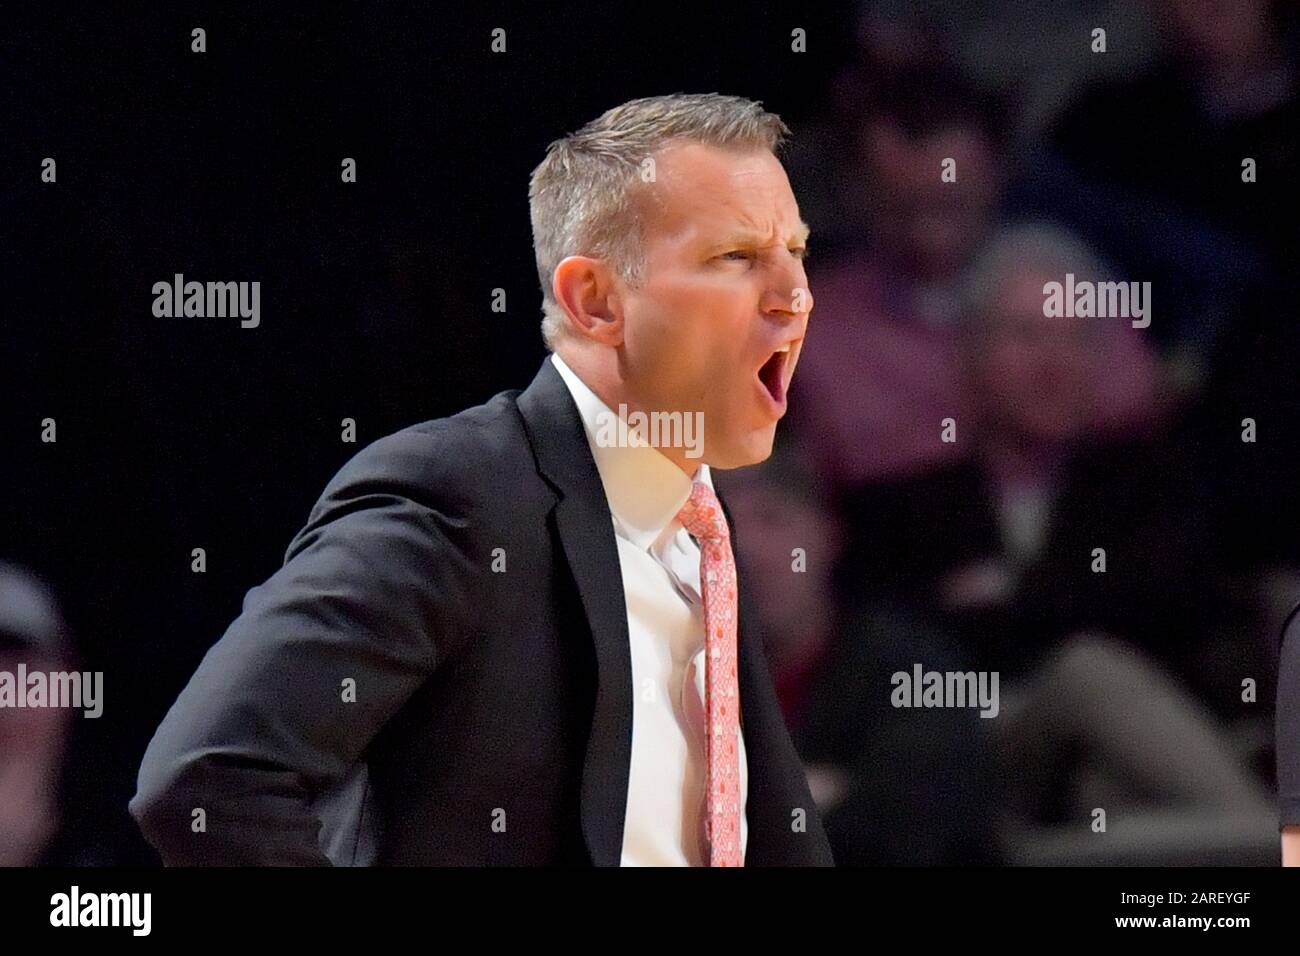 Alabama Crimson Tide head coach Nate Oats during the first half against the Vanderbilt Commodores of an NCAA SEC basketball game at Memorial Gym. Wednesday, Jan 22, 2020, in Nashville. Alabama defeated Vanderbilt 77-62.  (Photo by IOS/ESPA-Images) Stock Photo